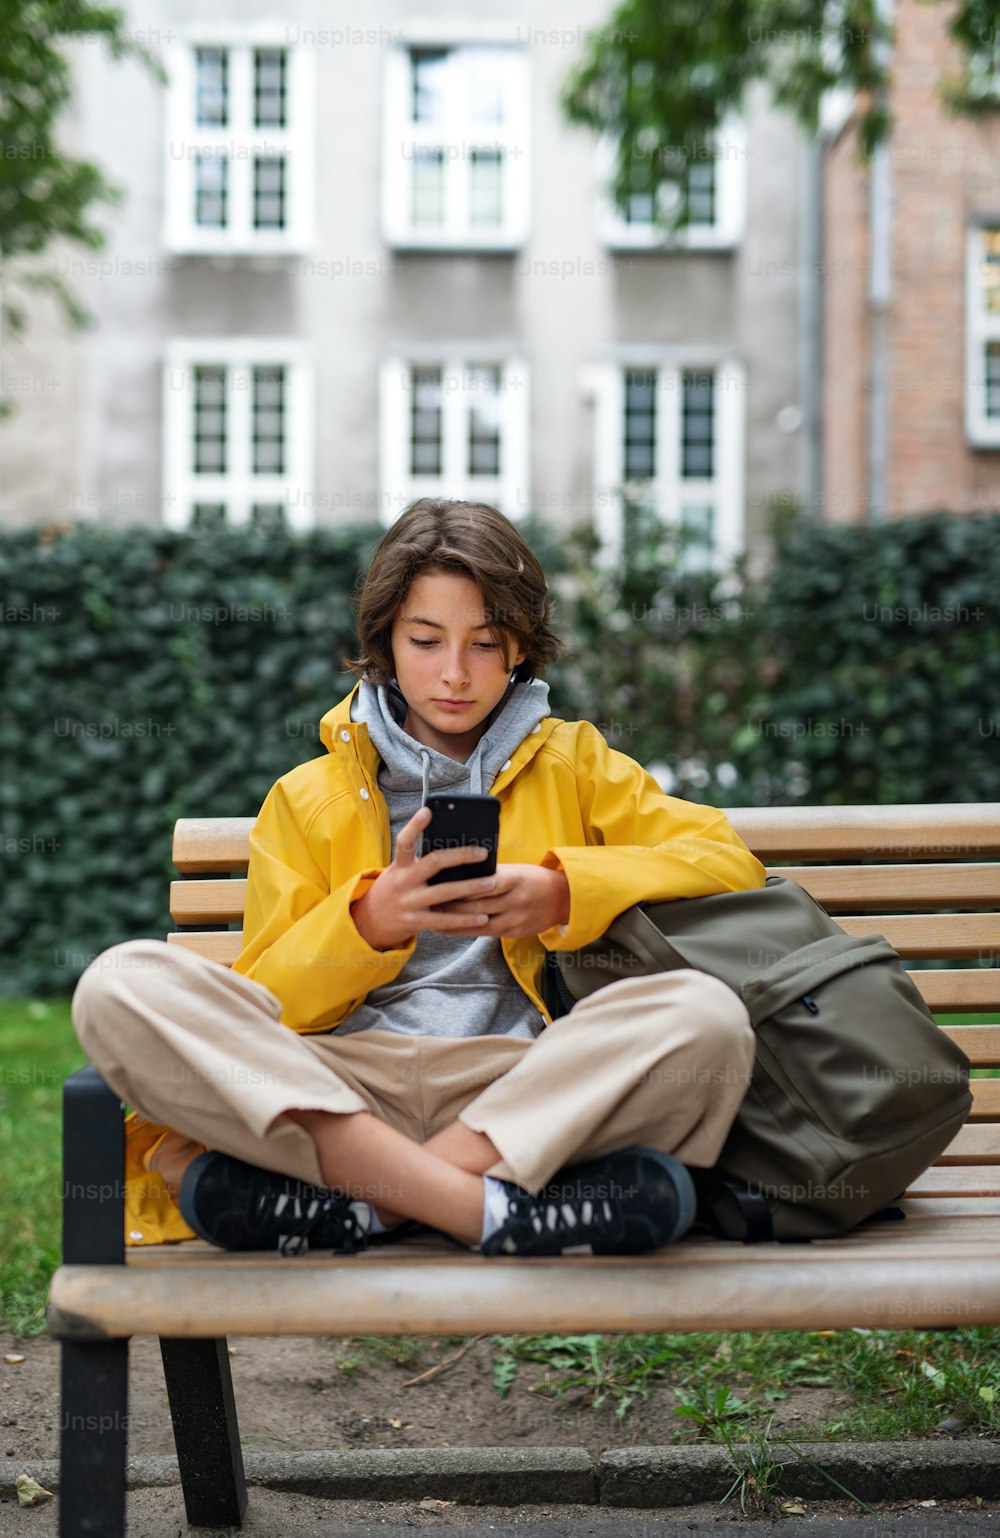 A preteen schoolgirl sitting on bench and using smartphone outdoors in town.